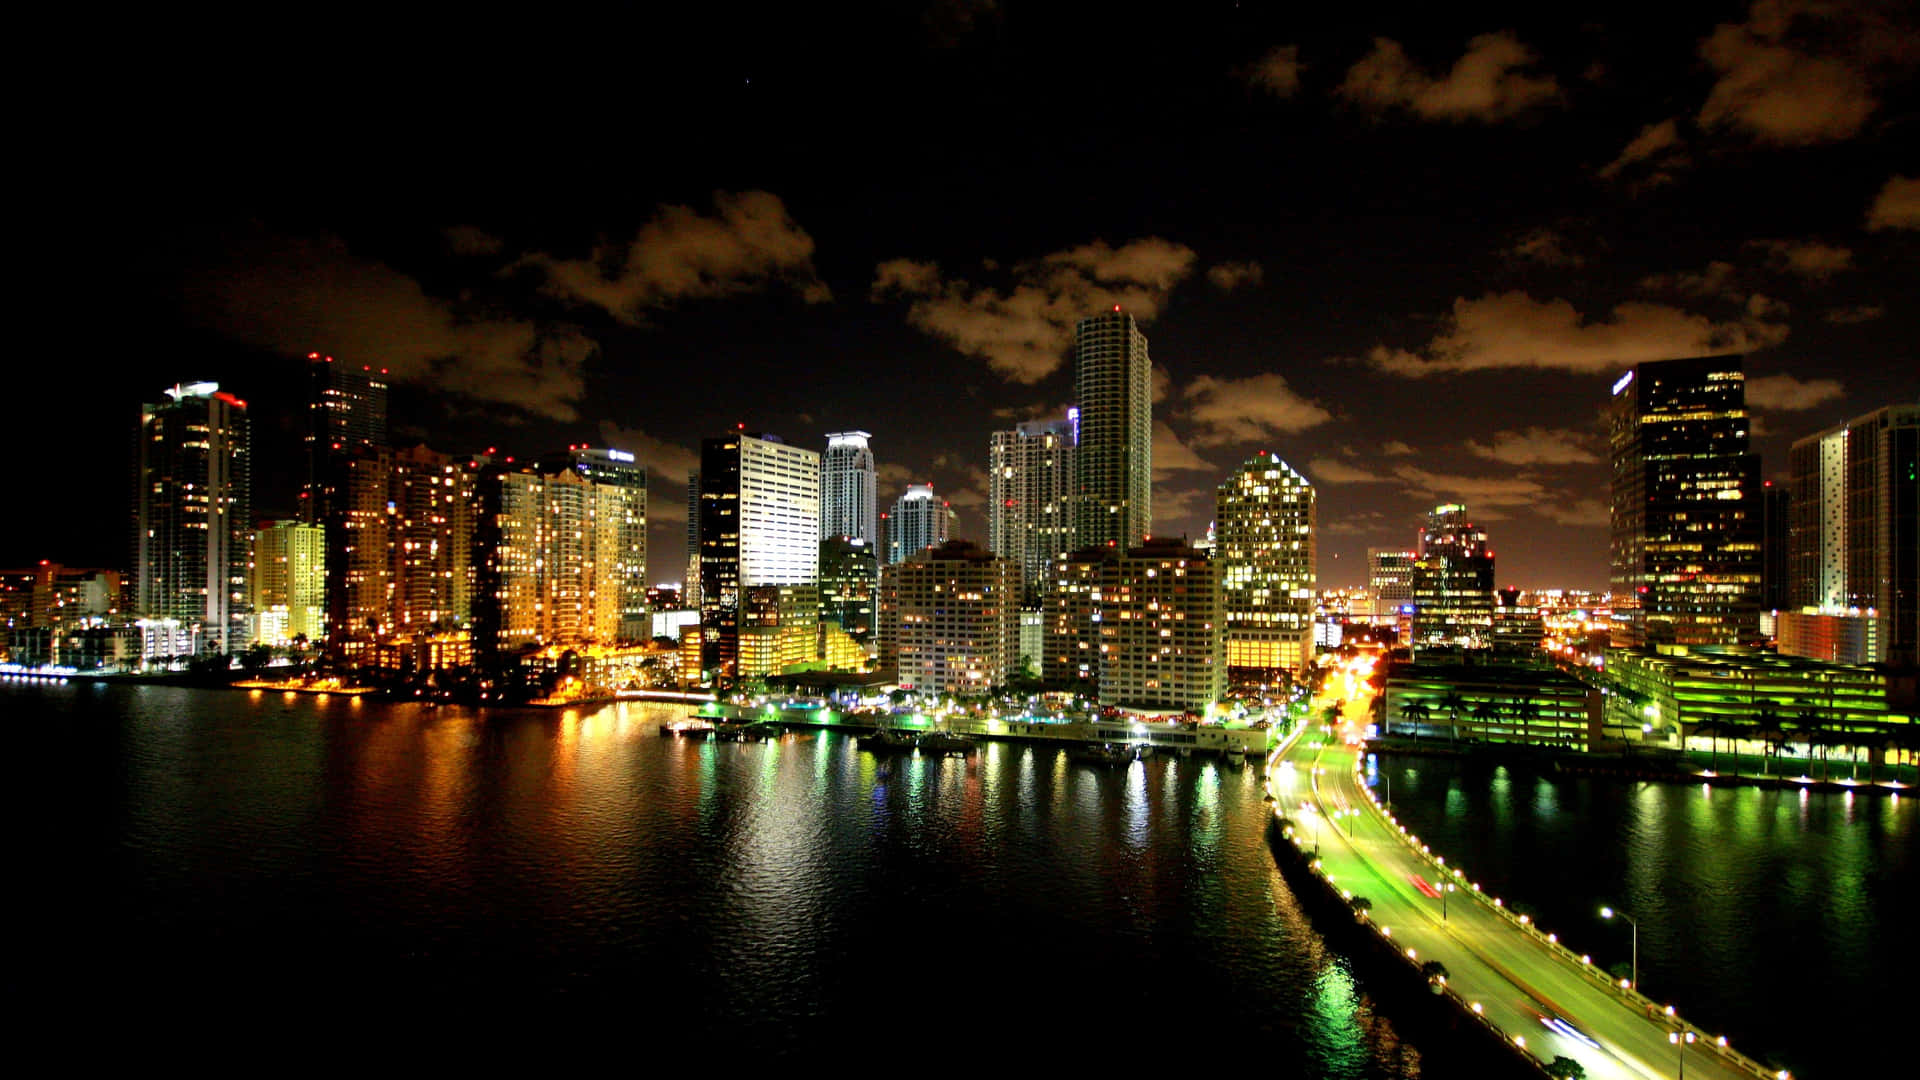 The vibrant skyline of Miami, Florida during a sunset.